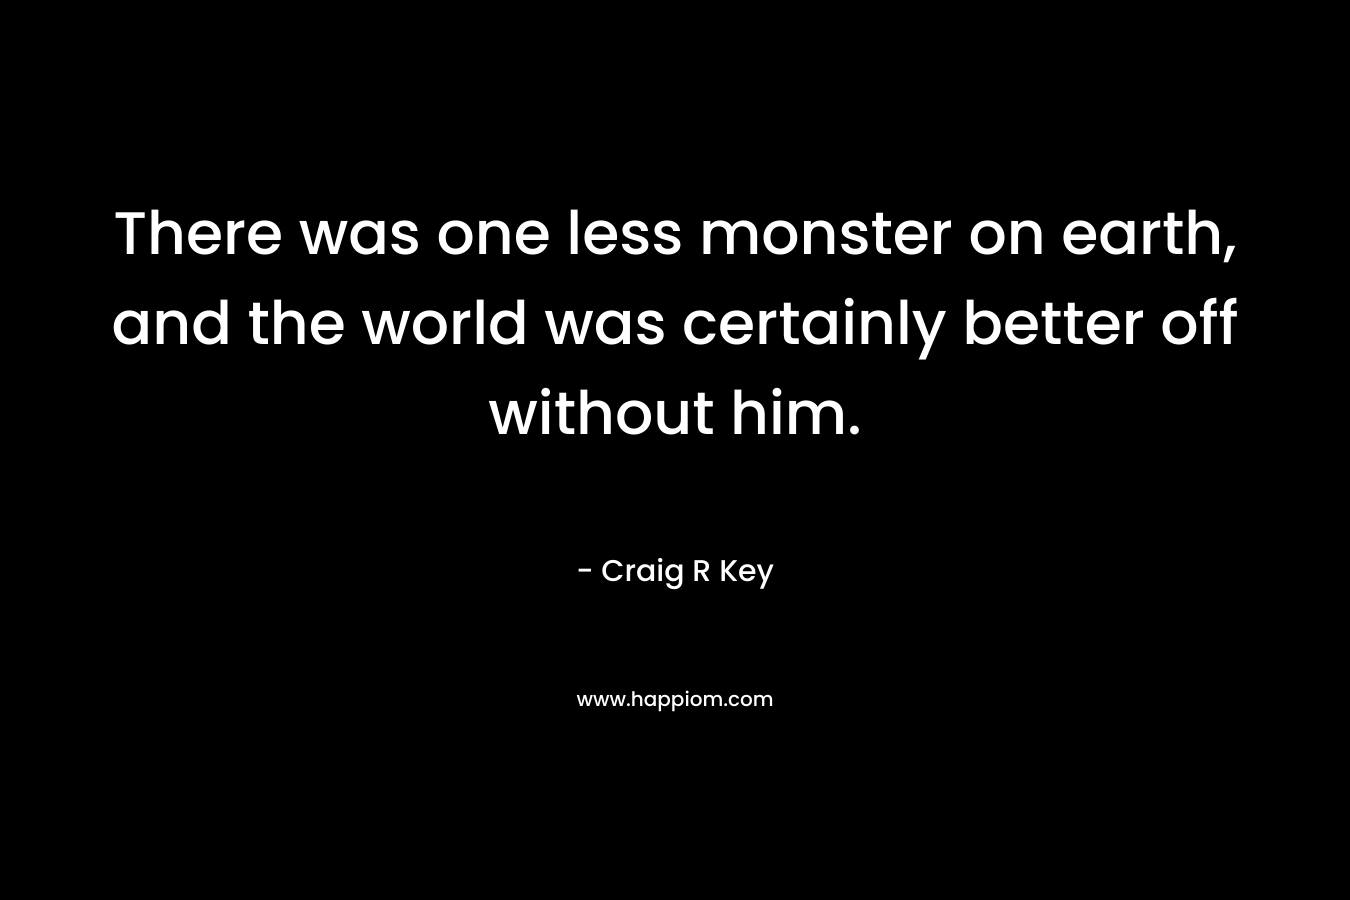 There was one less monster on earth, and the world was certainly better off without him.